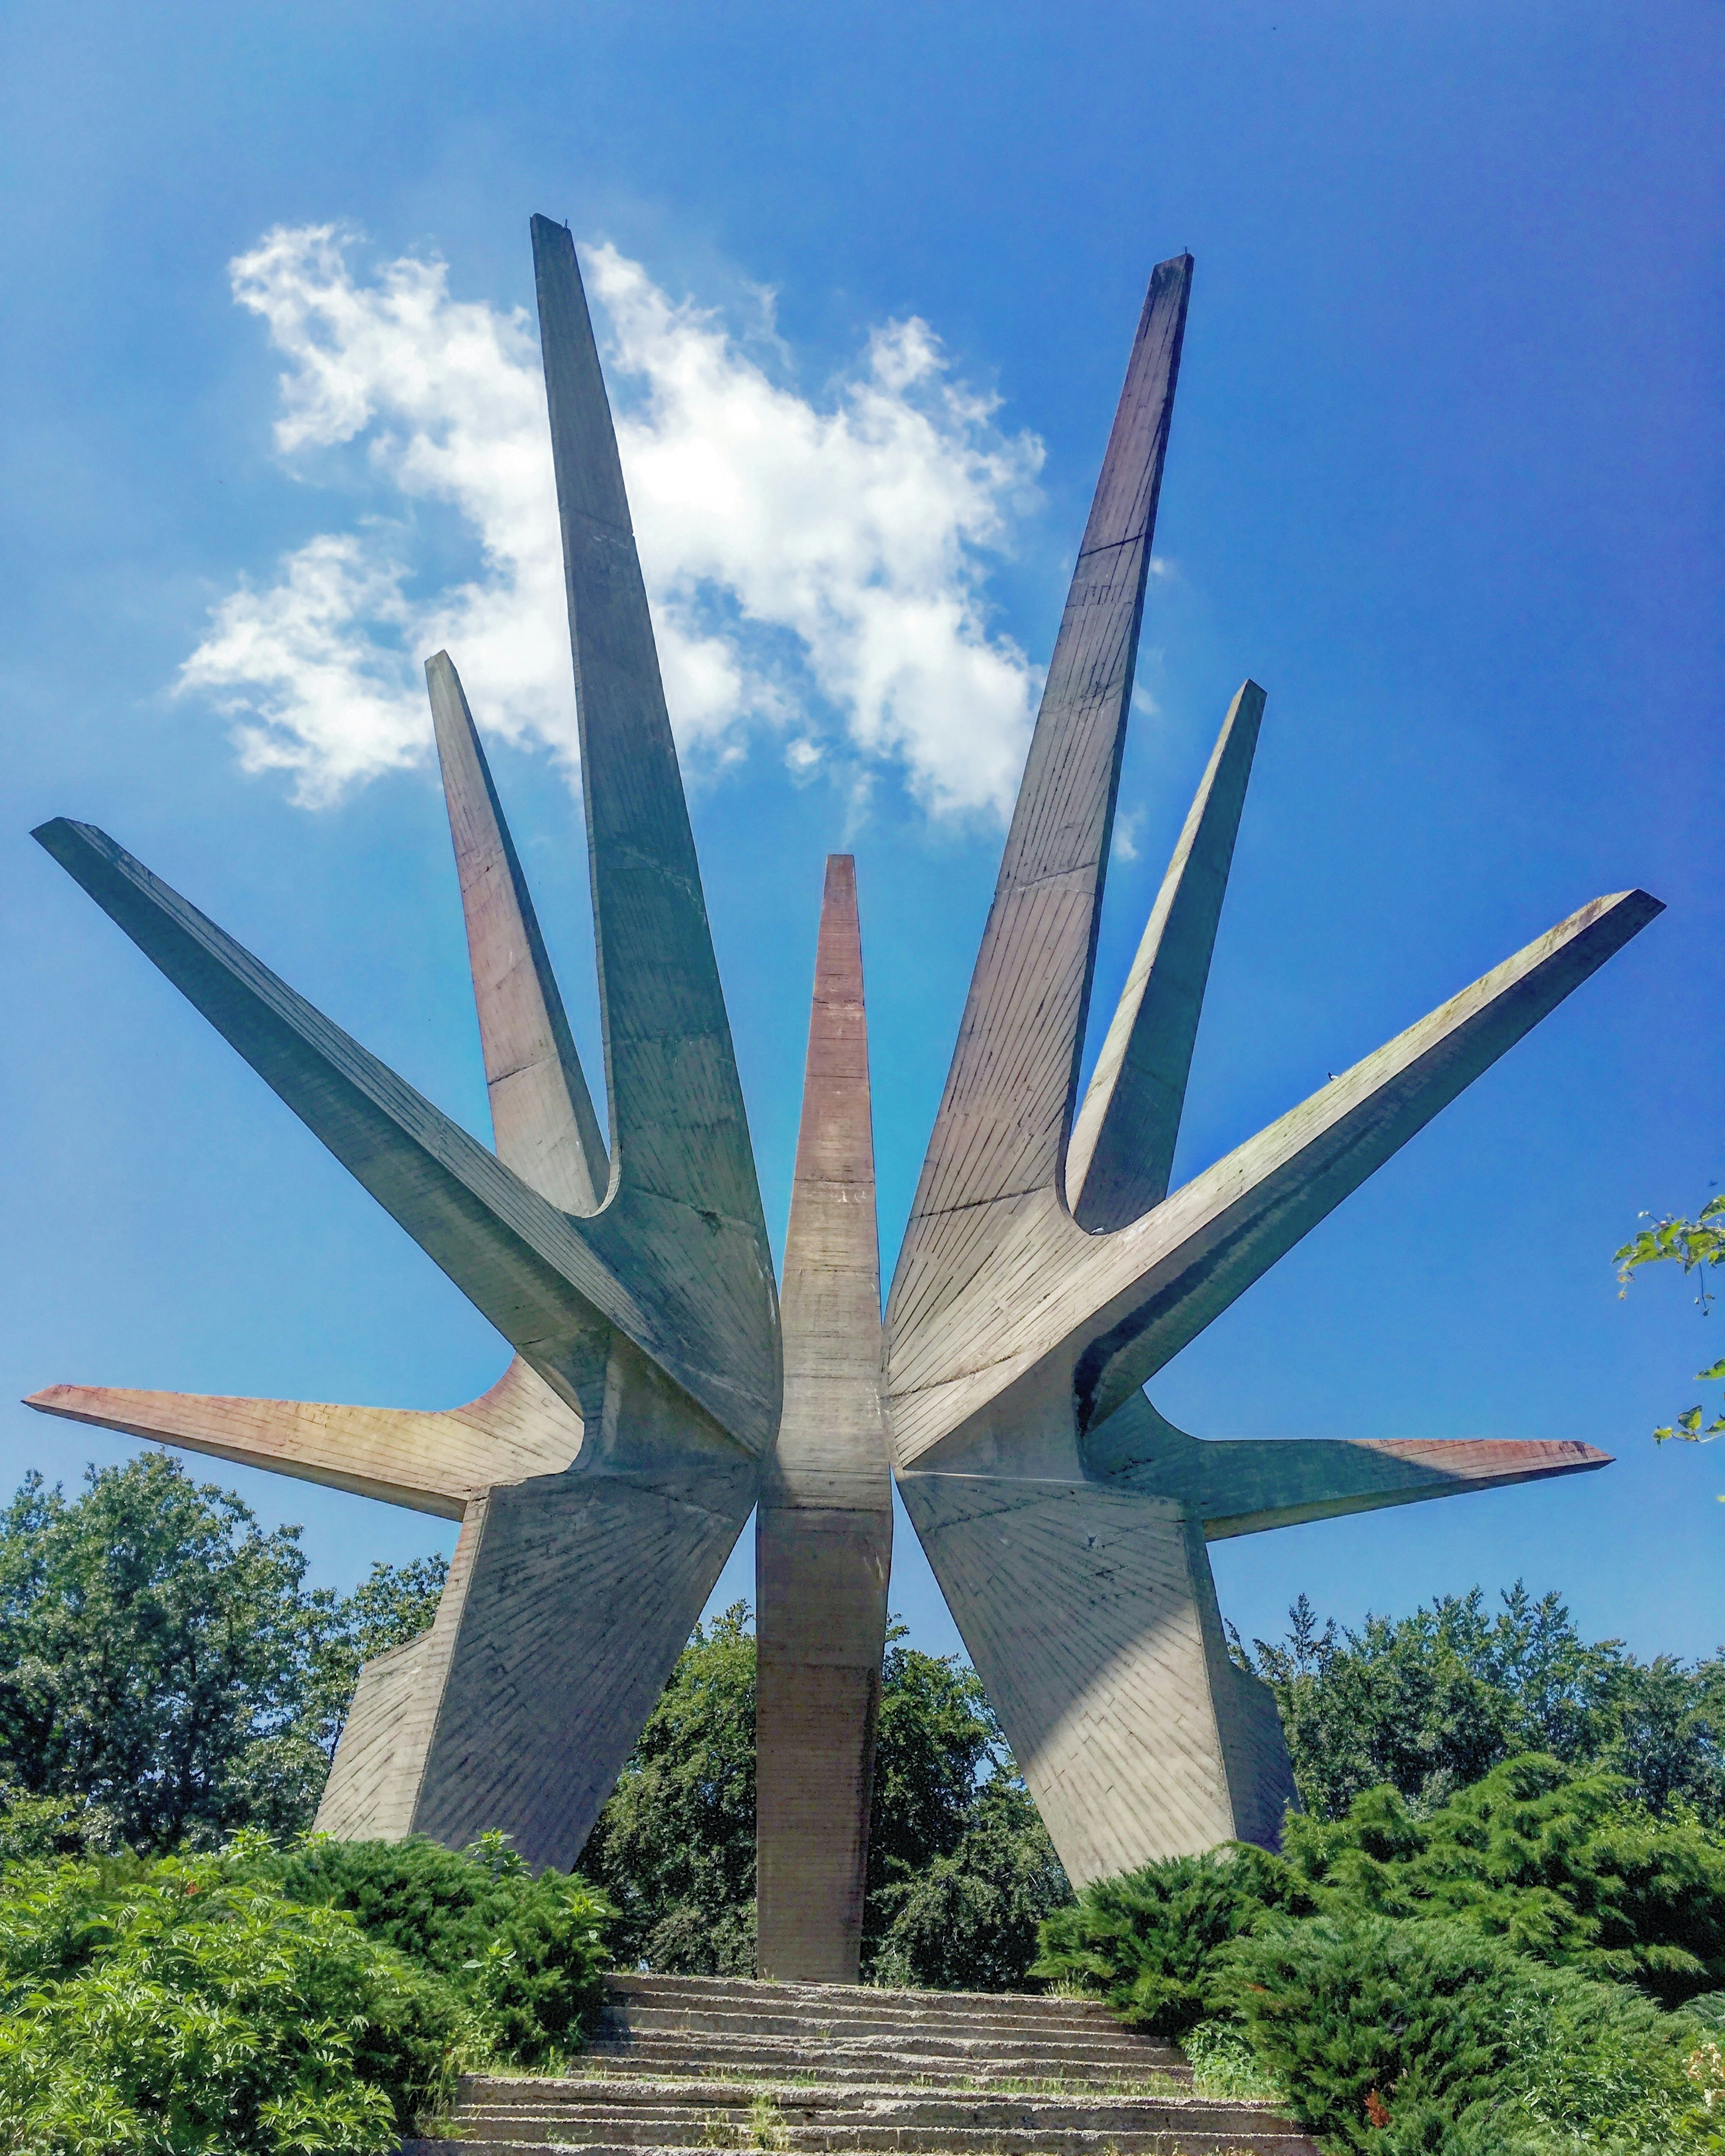 A large concrete structure branches out into a three-dimensional star shape against a blue sky.